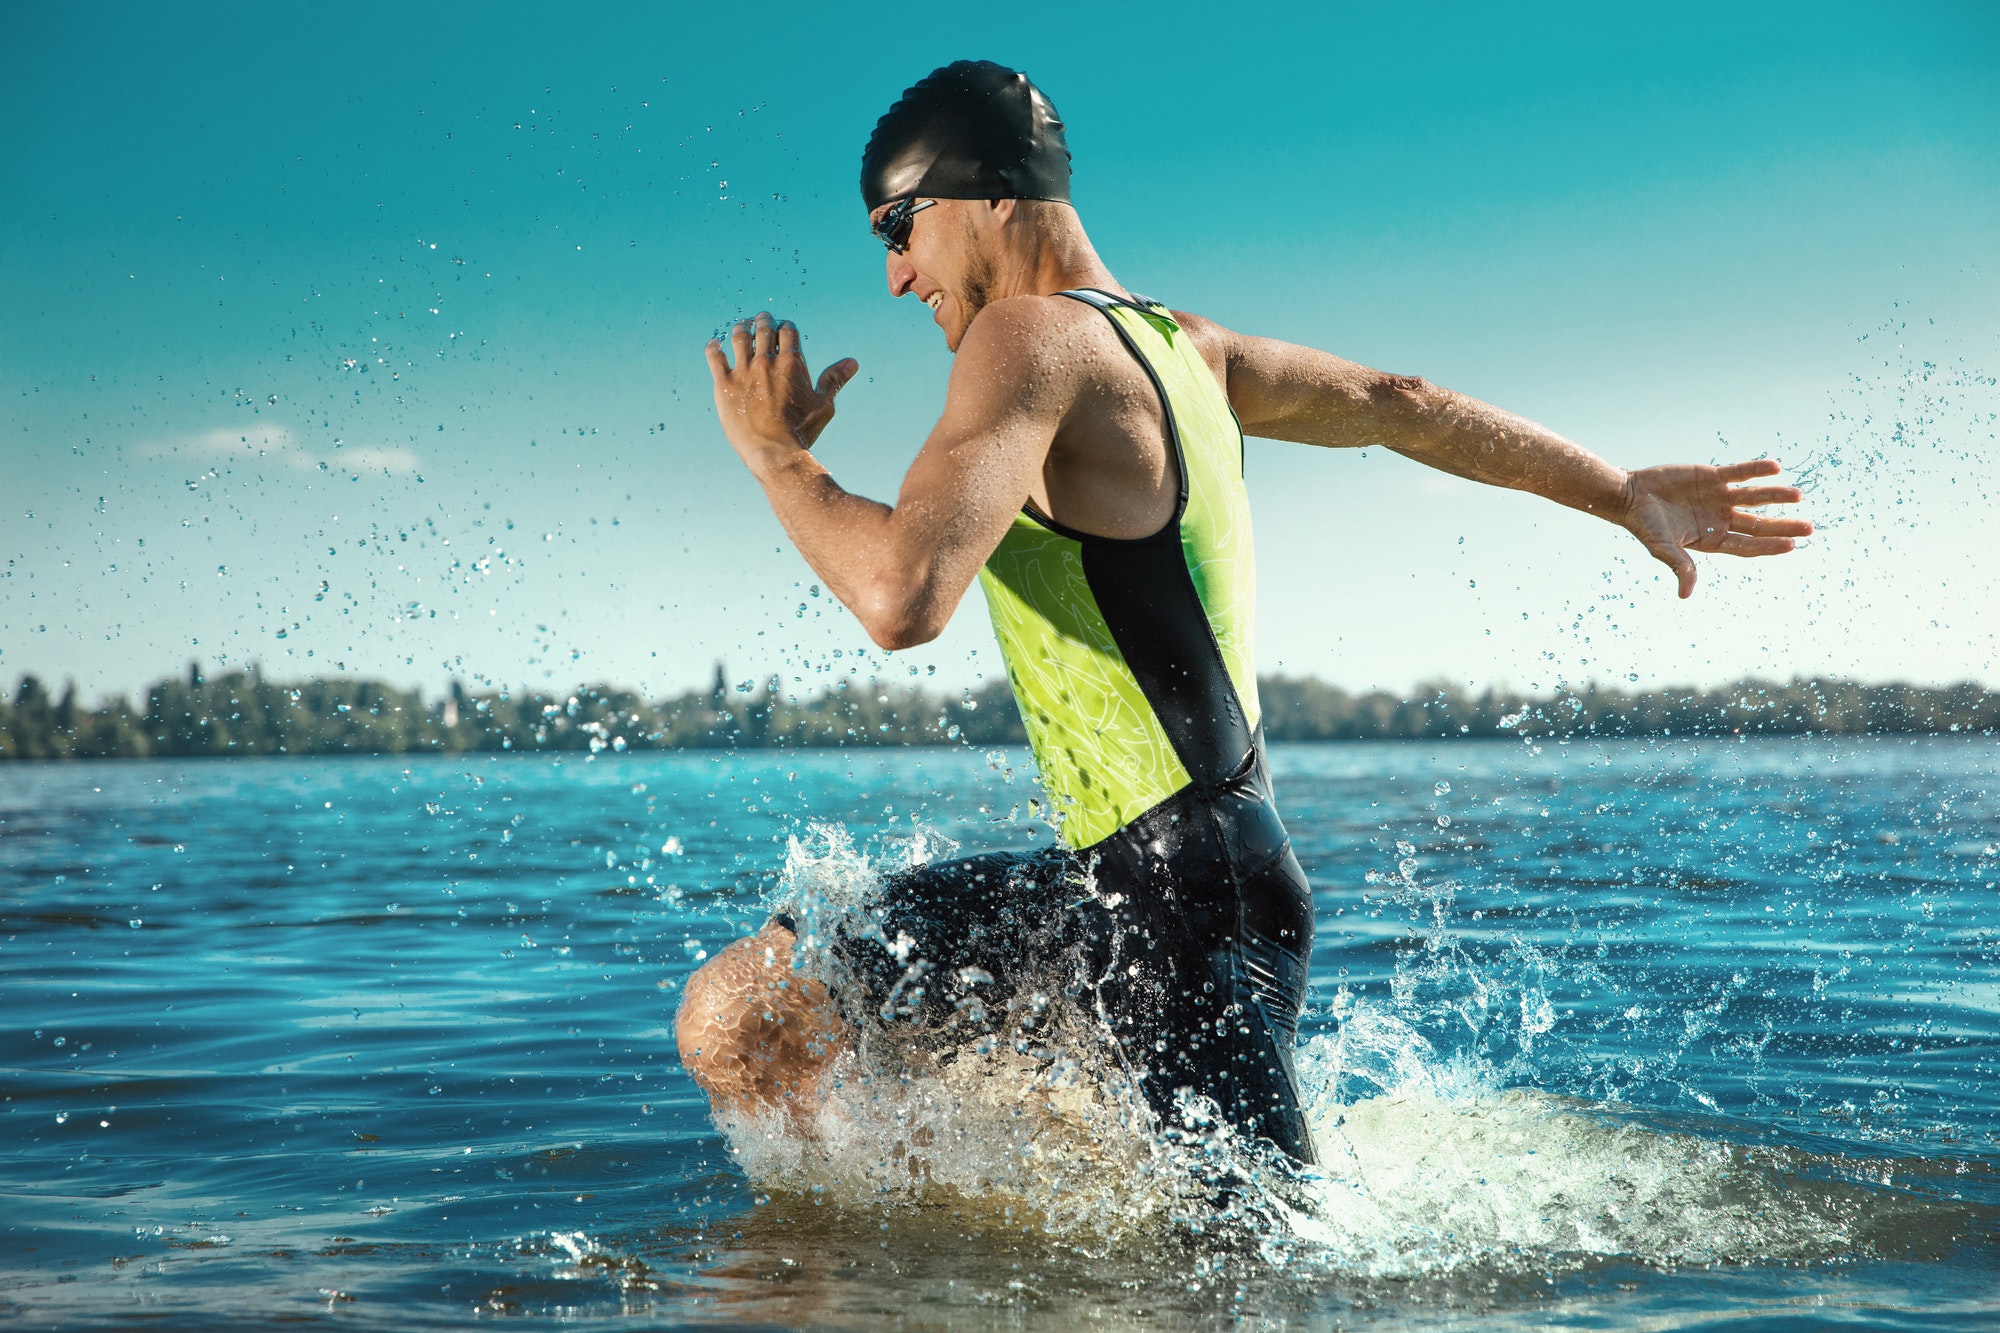 Professional triathlete swimming in river's open water